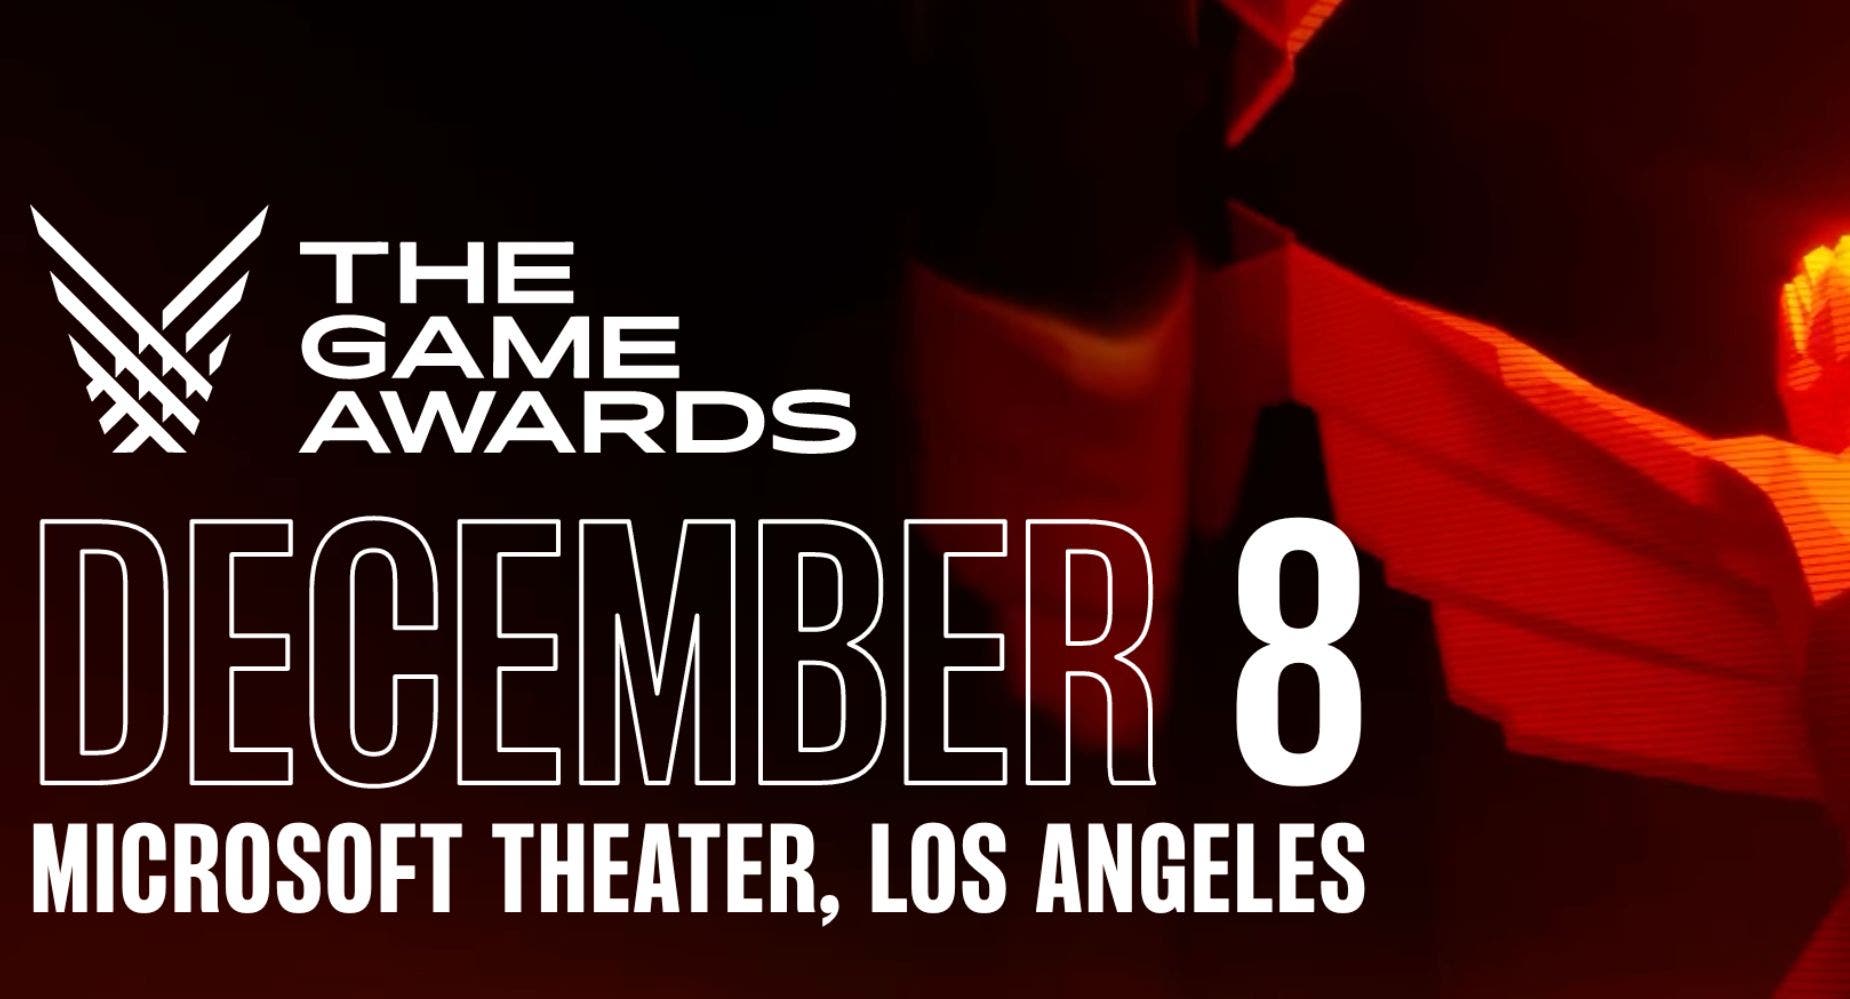 What Is The Best Video Game Of The Year? These Are The Nominees For The Game Awards 2022, Up For The Top Award Of The Industry